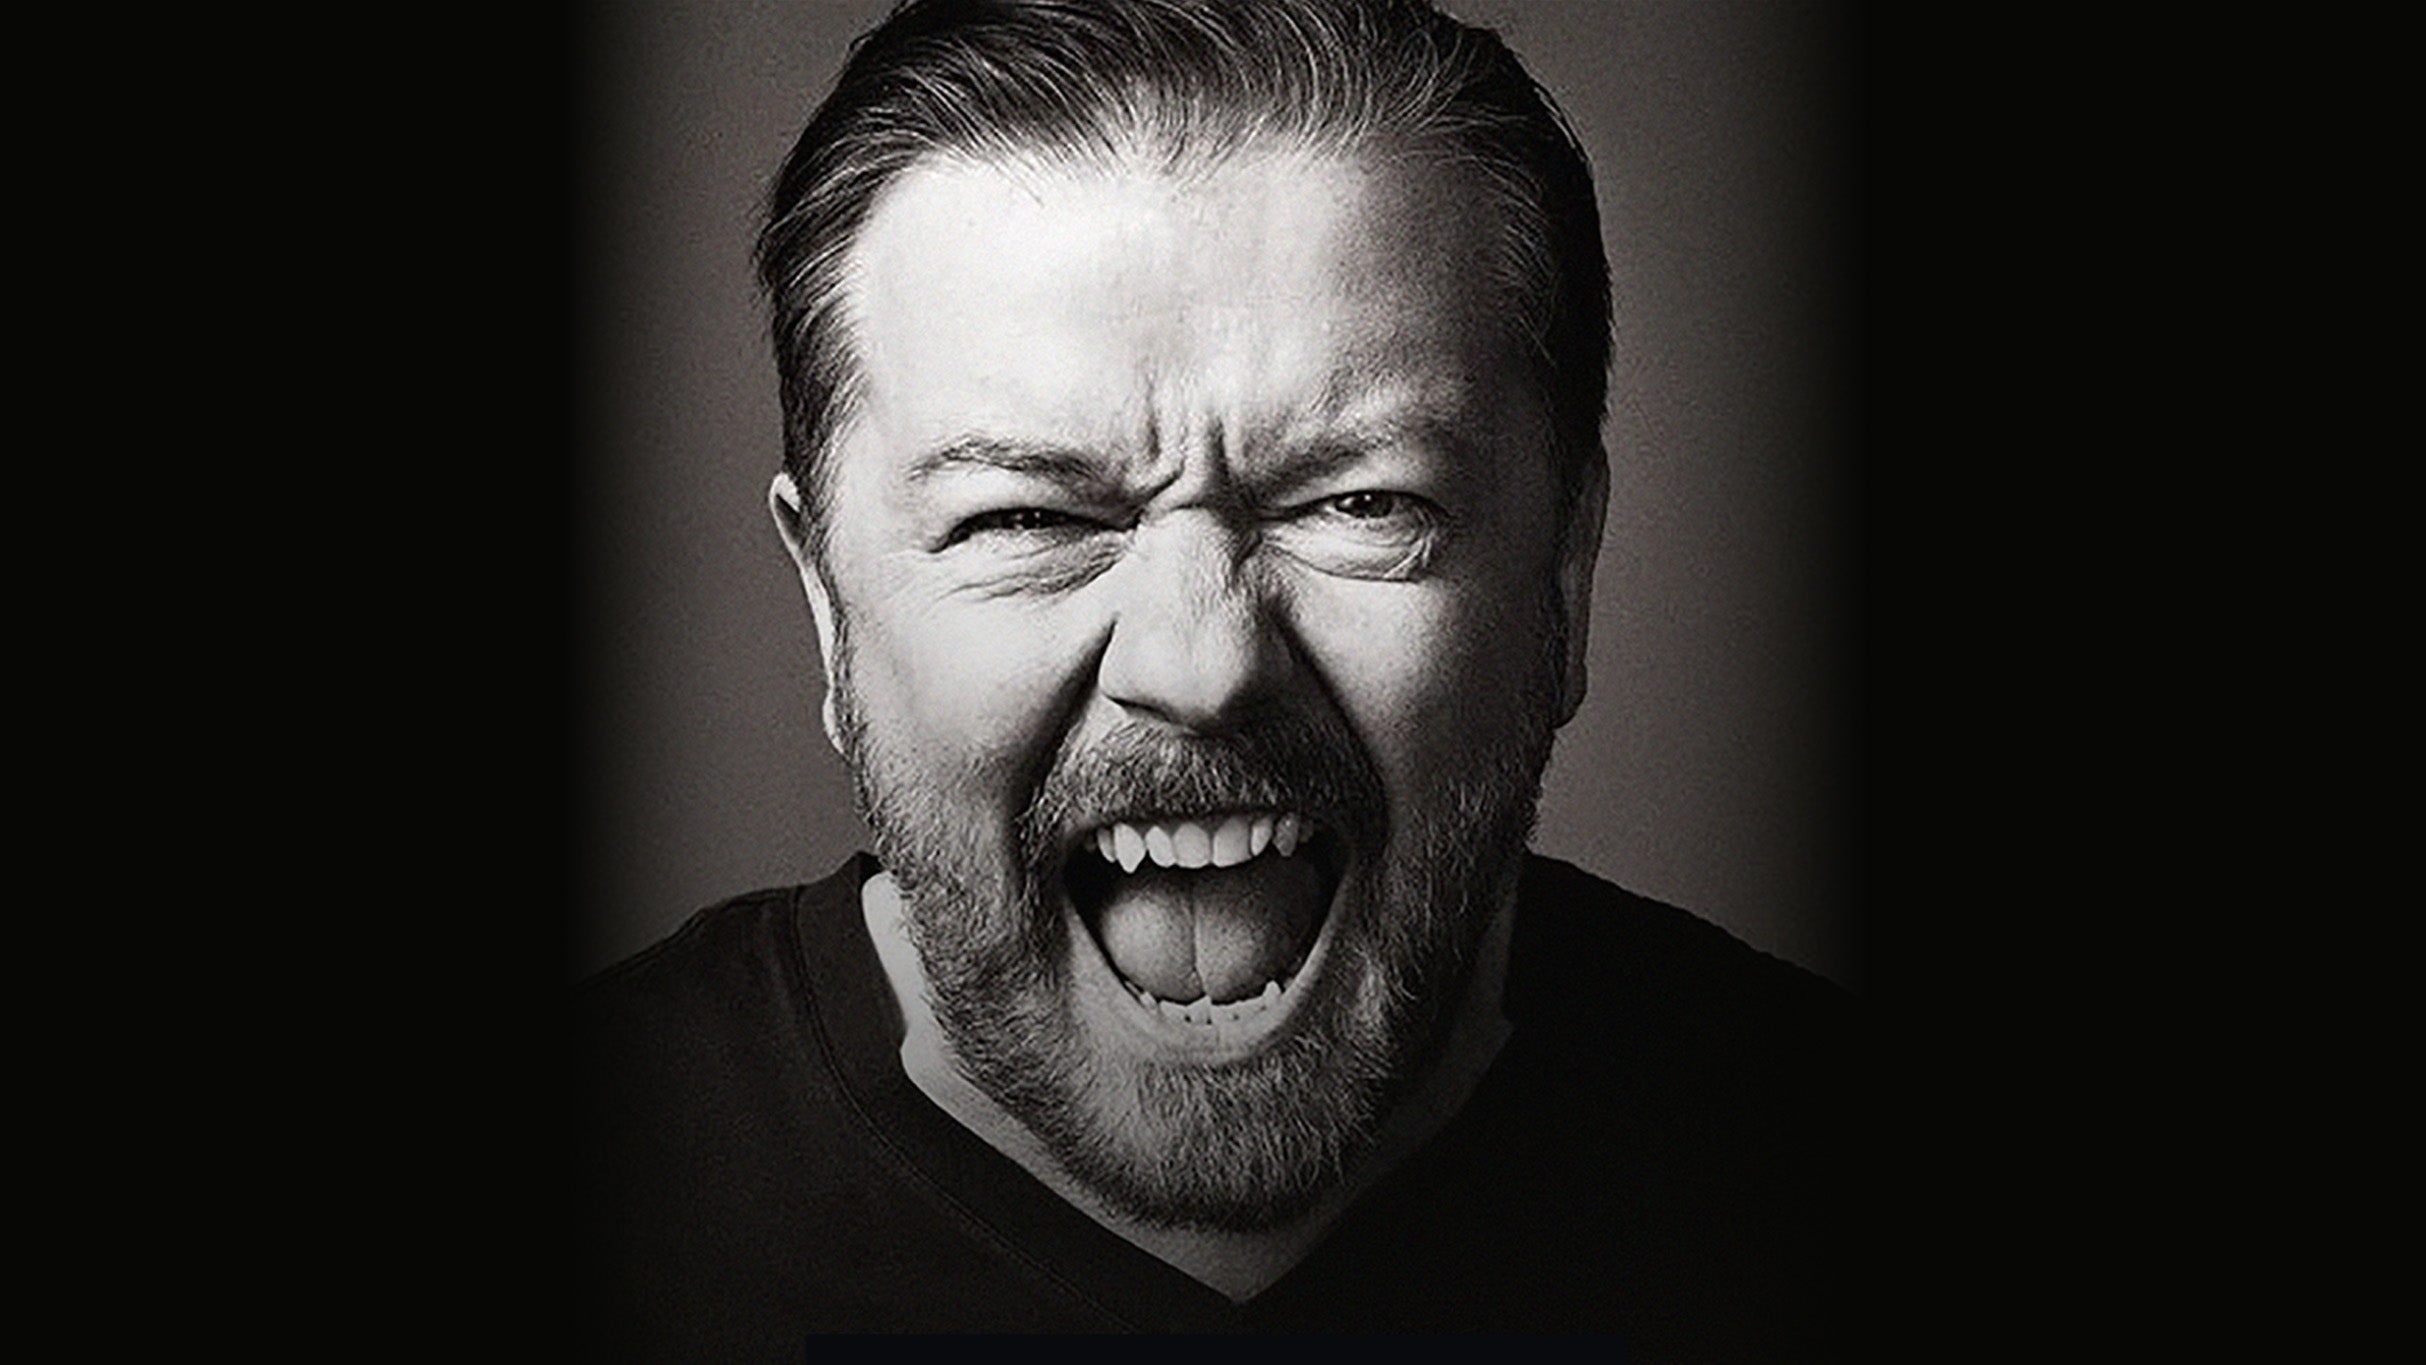 Ricky Gervais: Armageddon free pre-sale listing for concert tickets in Hollywood, CA (Hollywood Bowl)